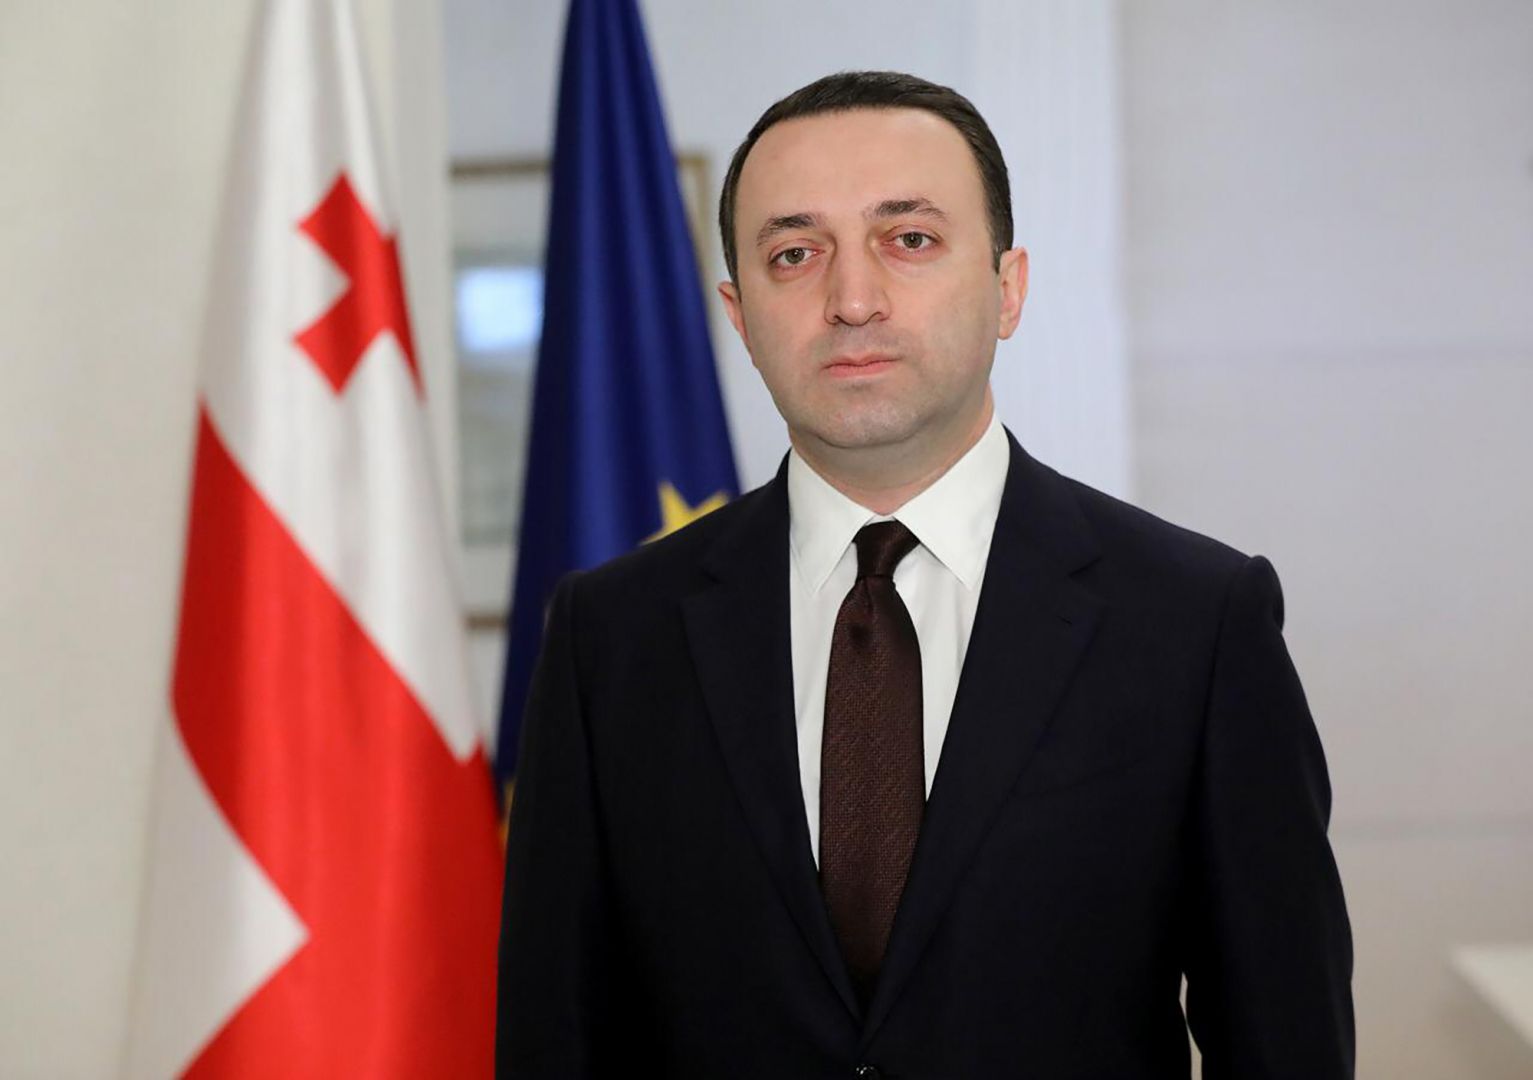 Azerbaijani President sends congratulatory letter to Prime Minister of Georgia on Independence Day